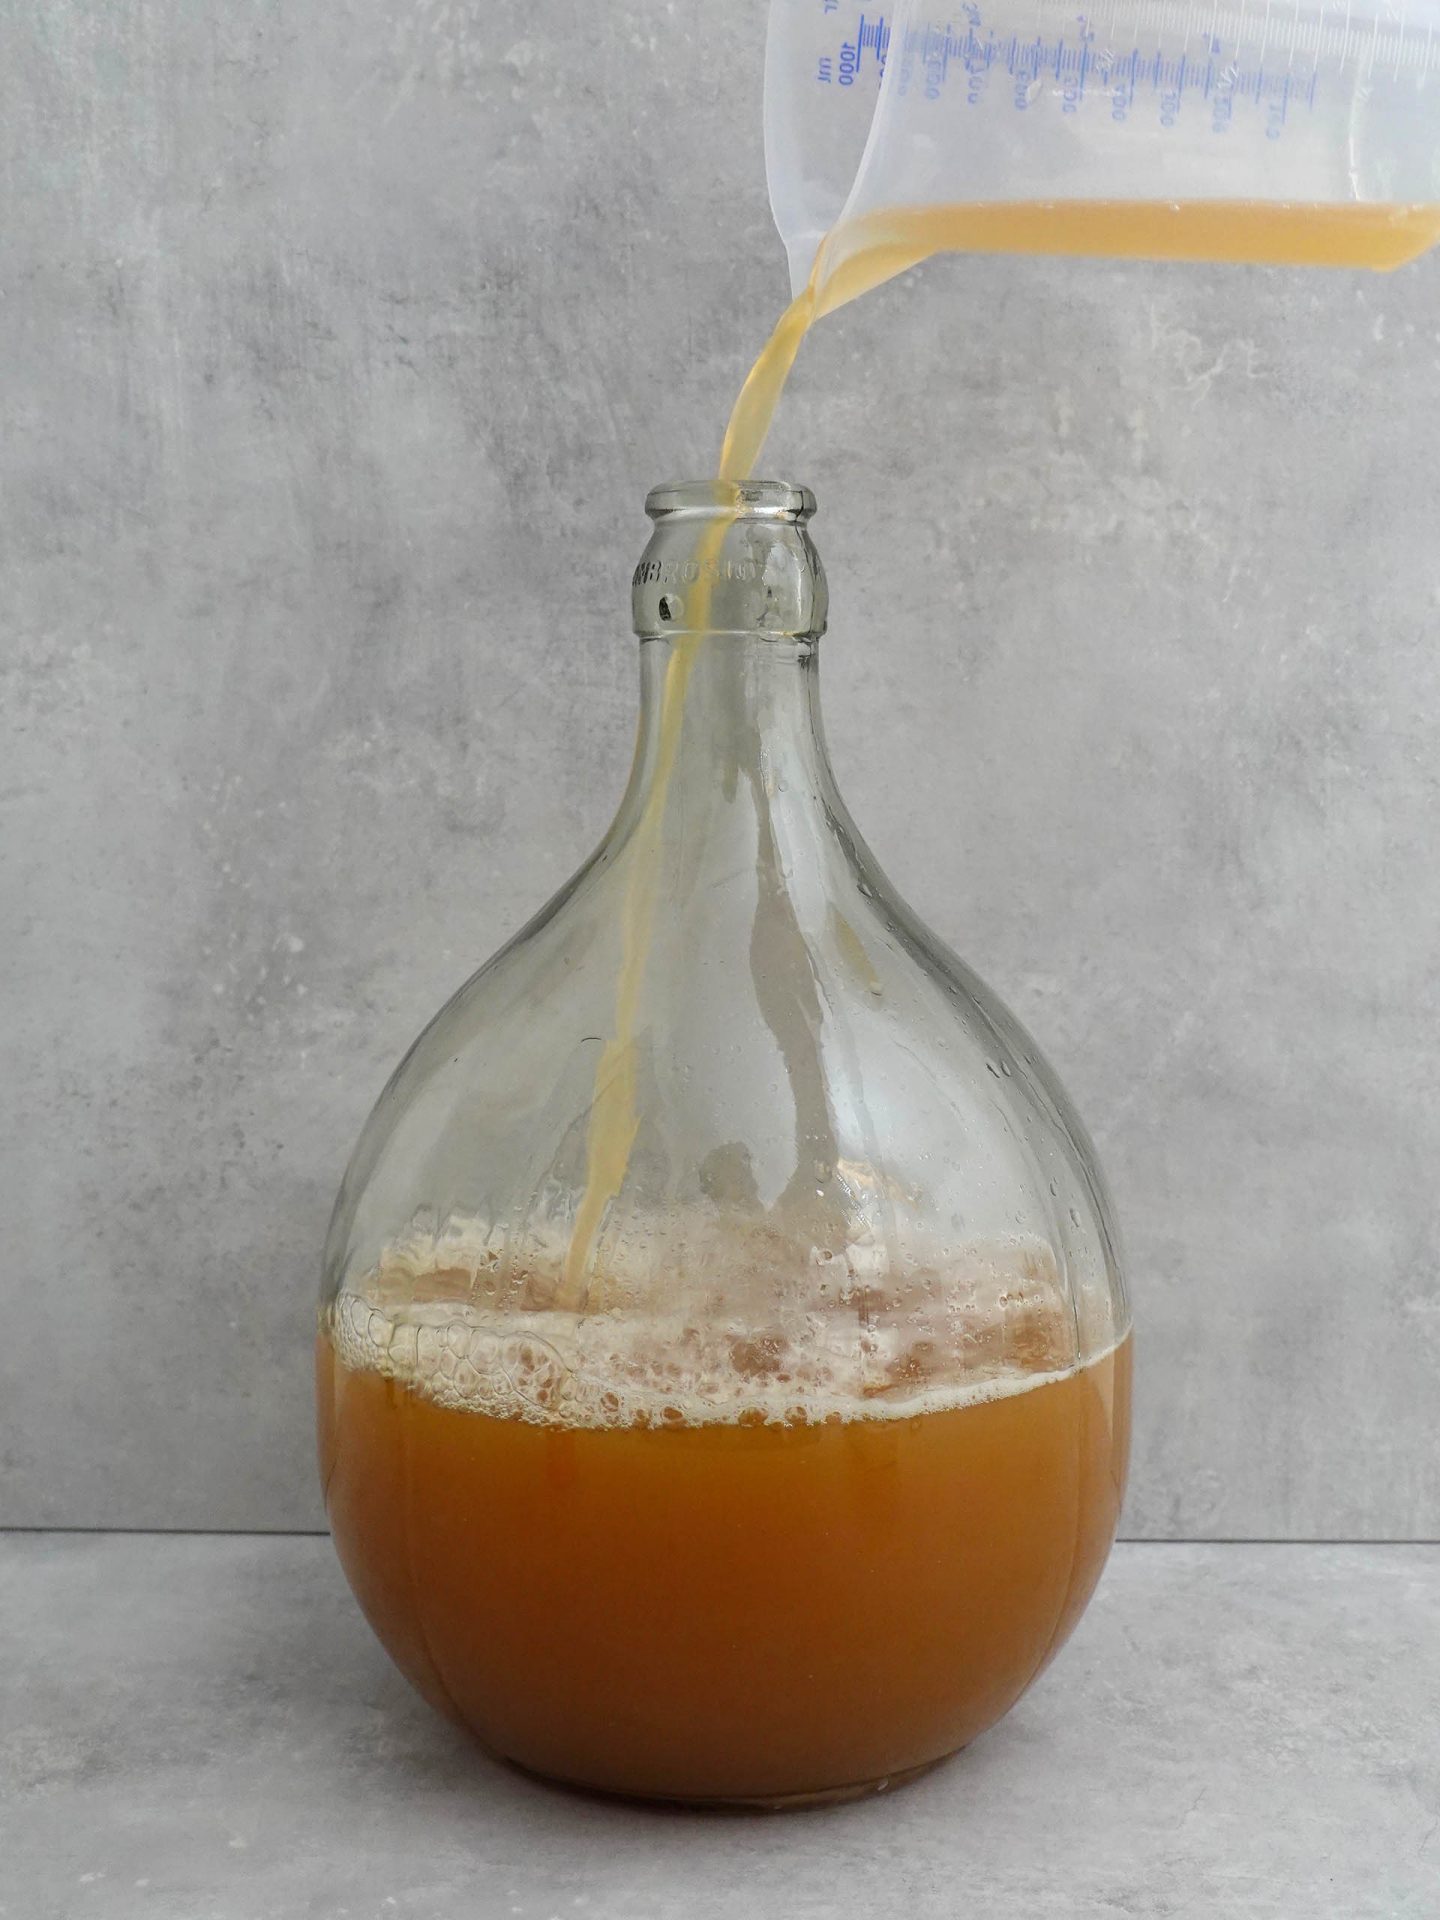 The mead is filled into the fermentation balloon